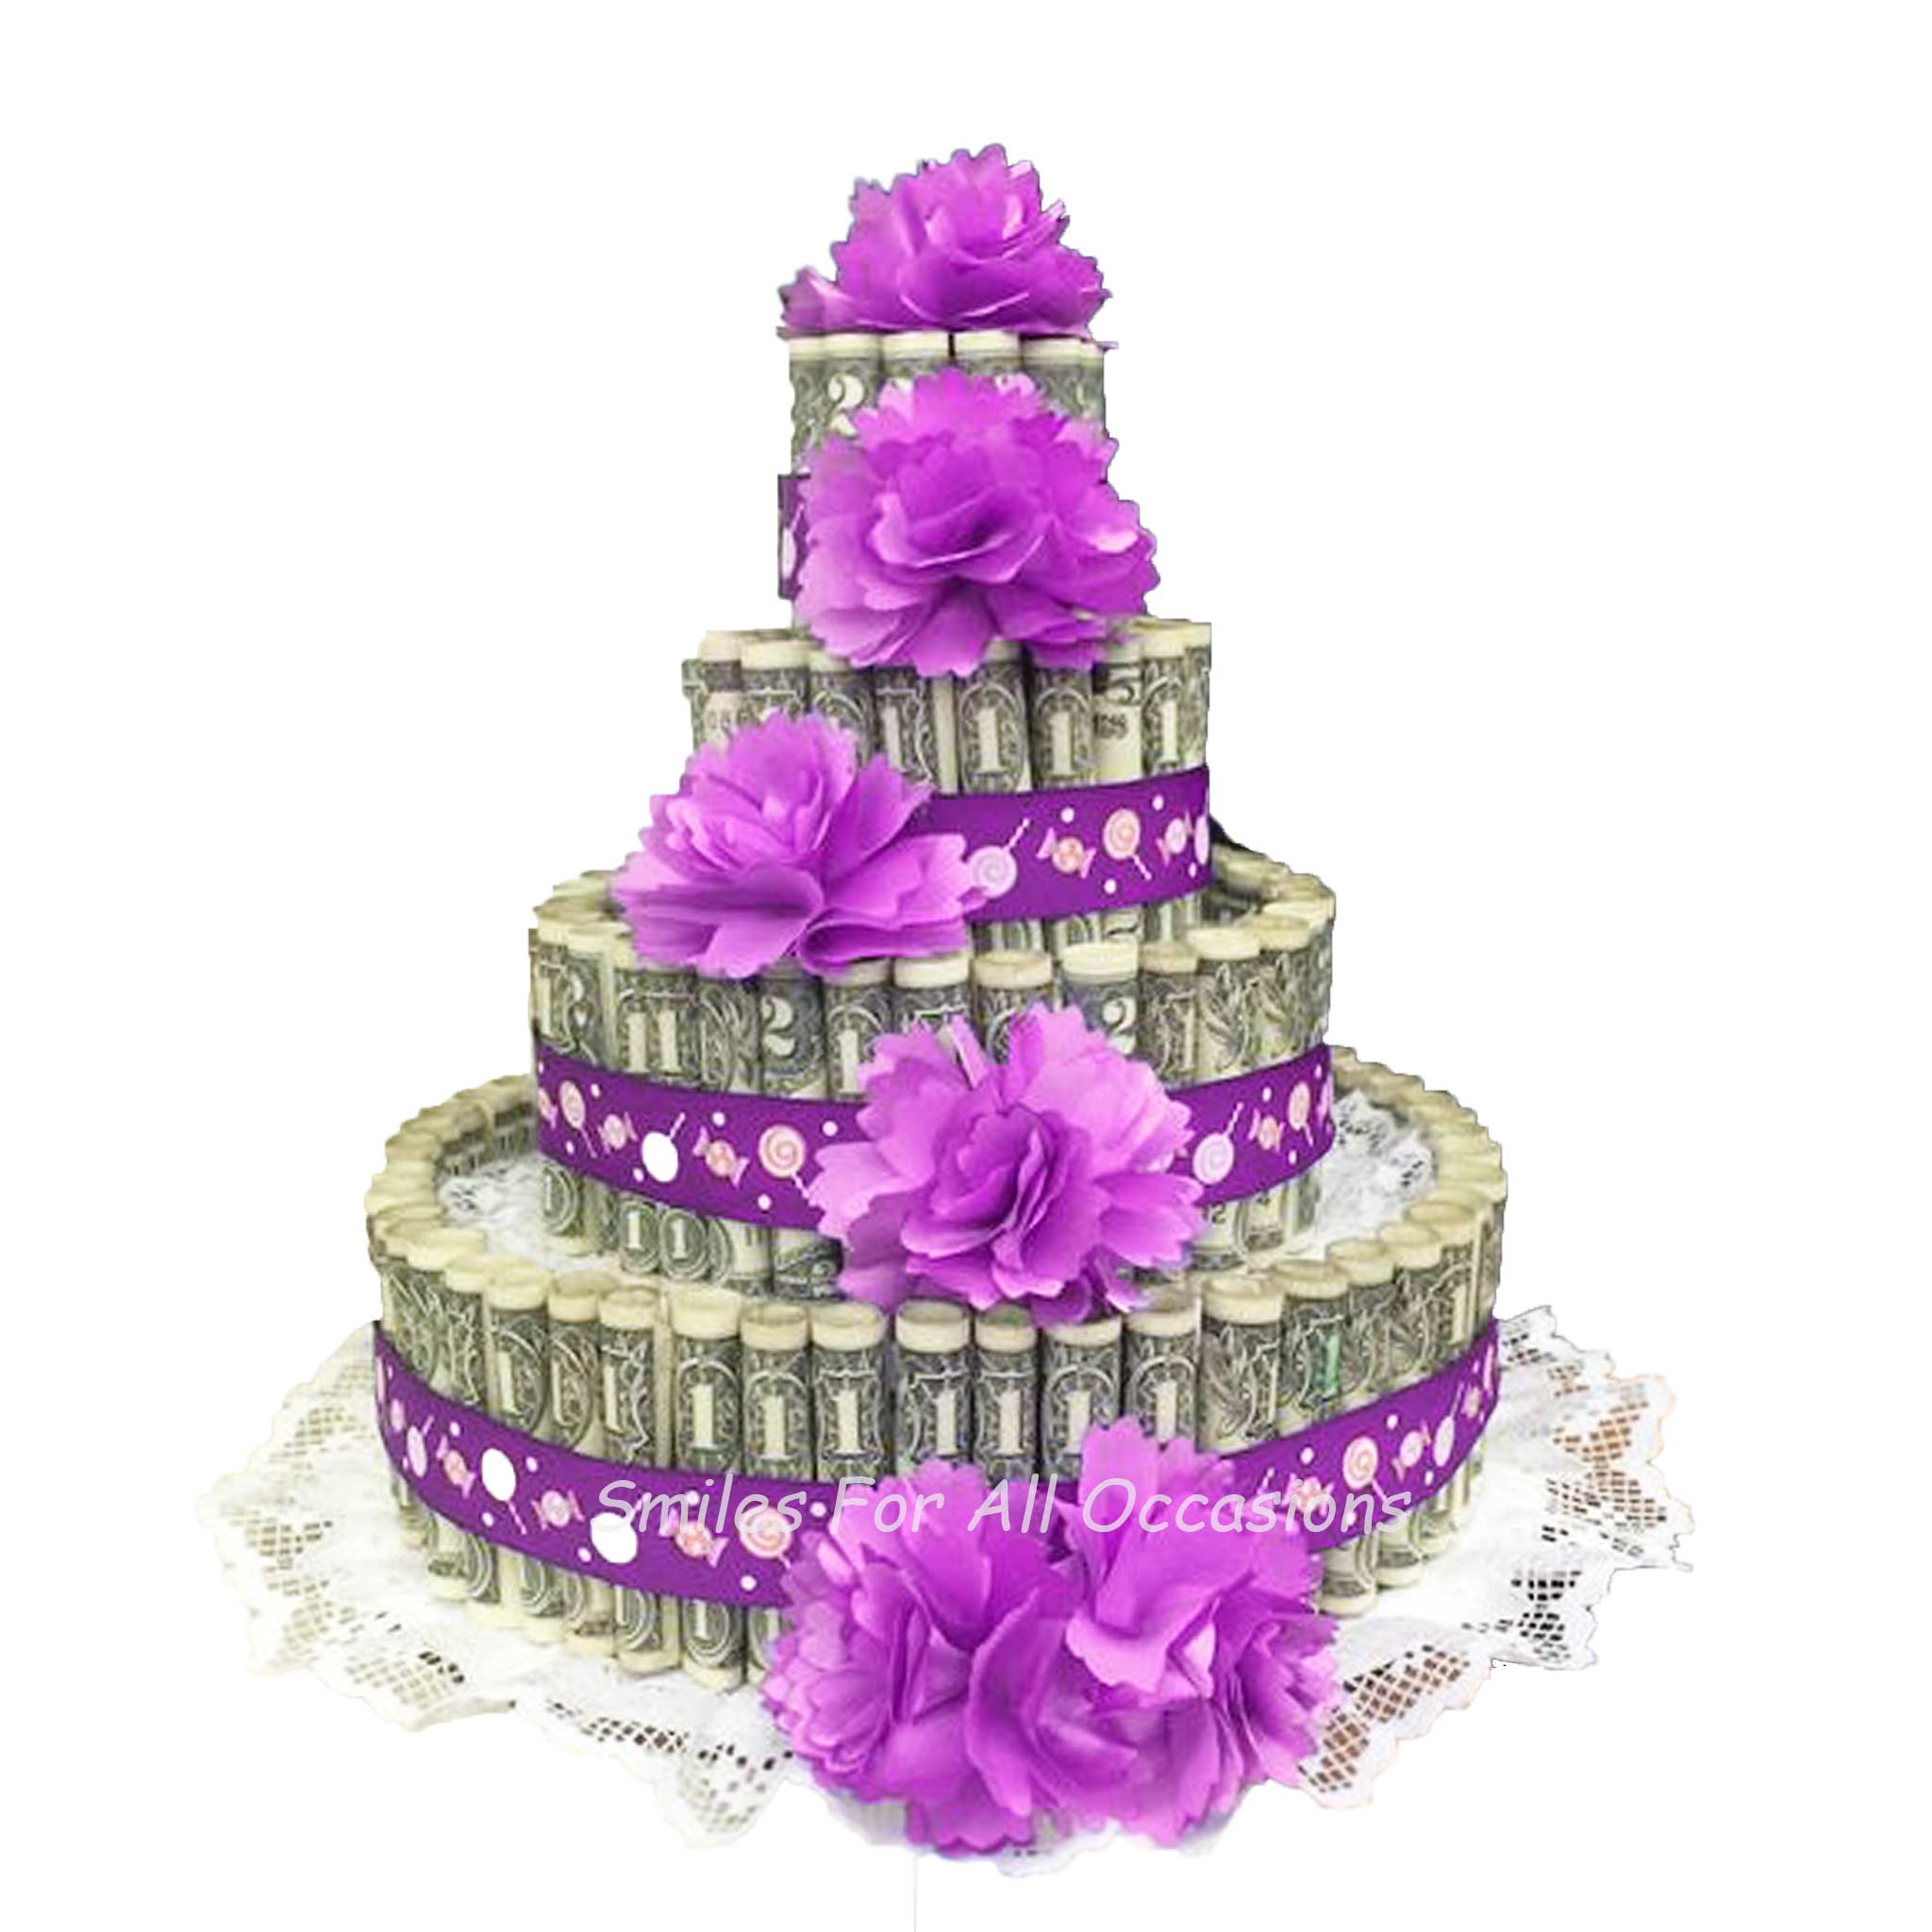 Money Safe cake with King's crown CS0289 – Circo's Pastry Shop